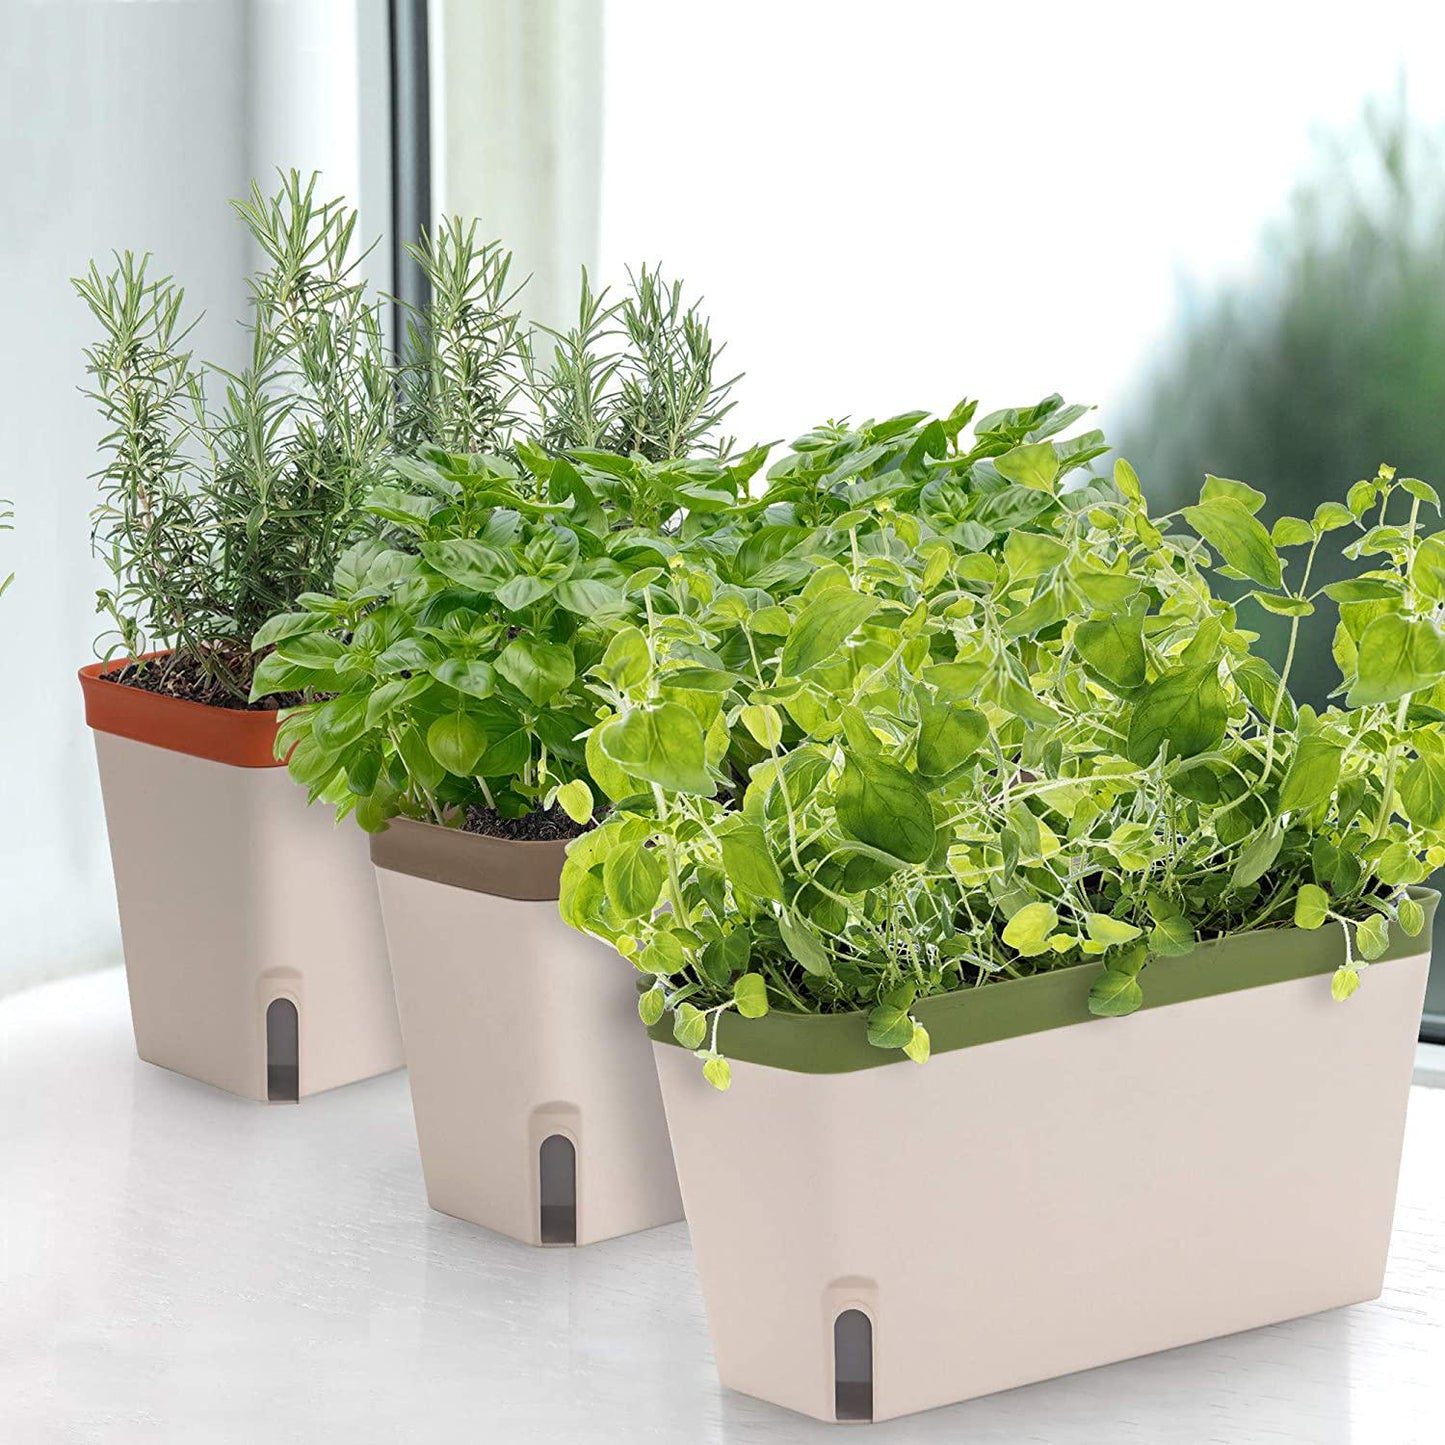 Amazing Creation Window Herb Planter Box Rectangular Self Watering Indoor Garden for Kitchens Grow Plants, Flowers or Succulents, Large Water Reservoir | Herb Pots 3 Pack